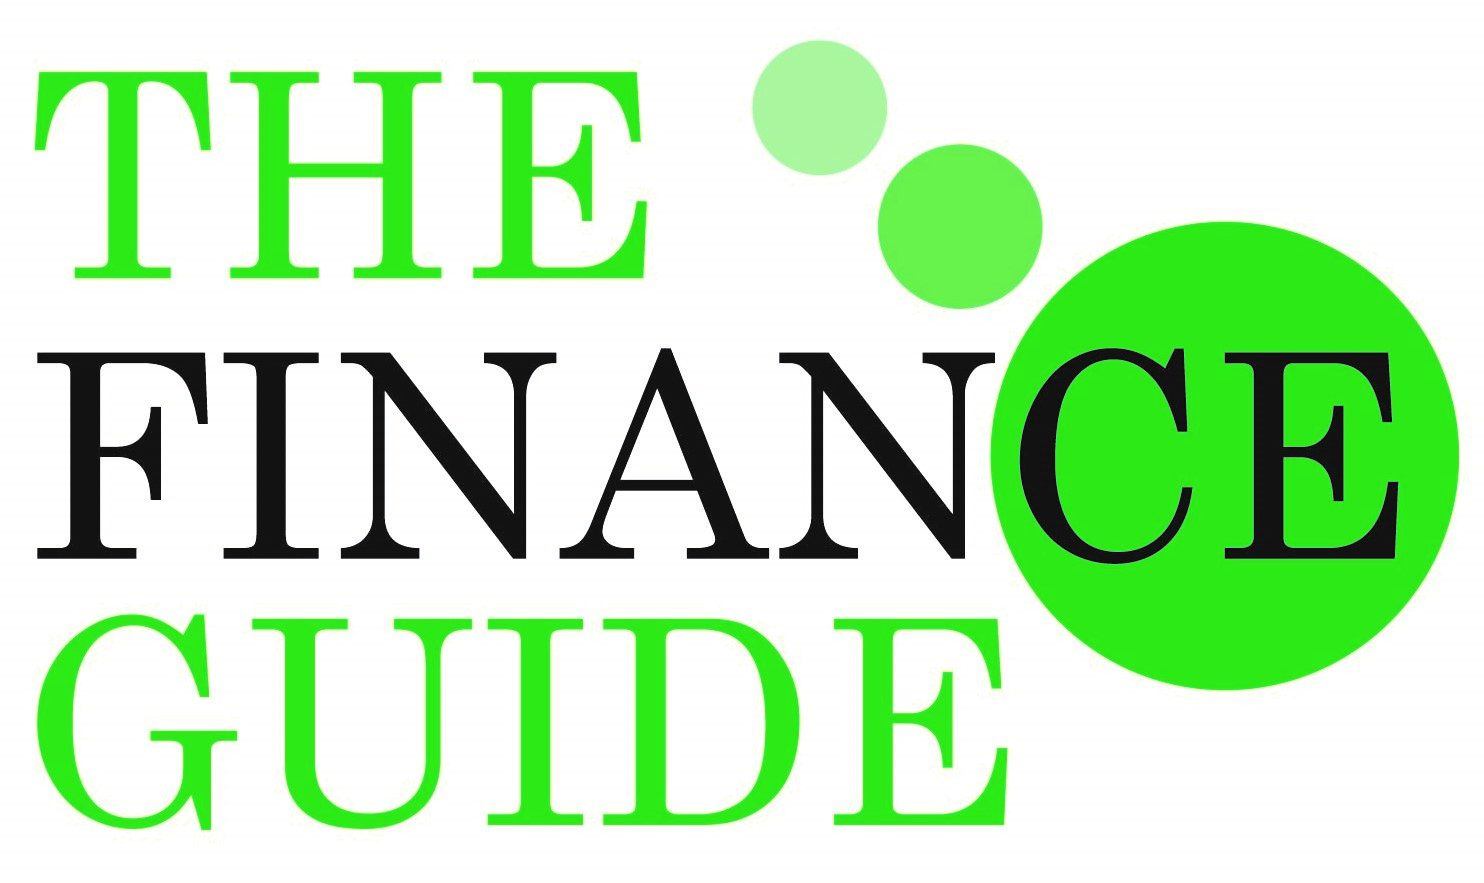 The Finance Guide